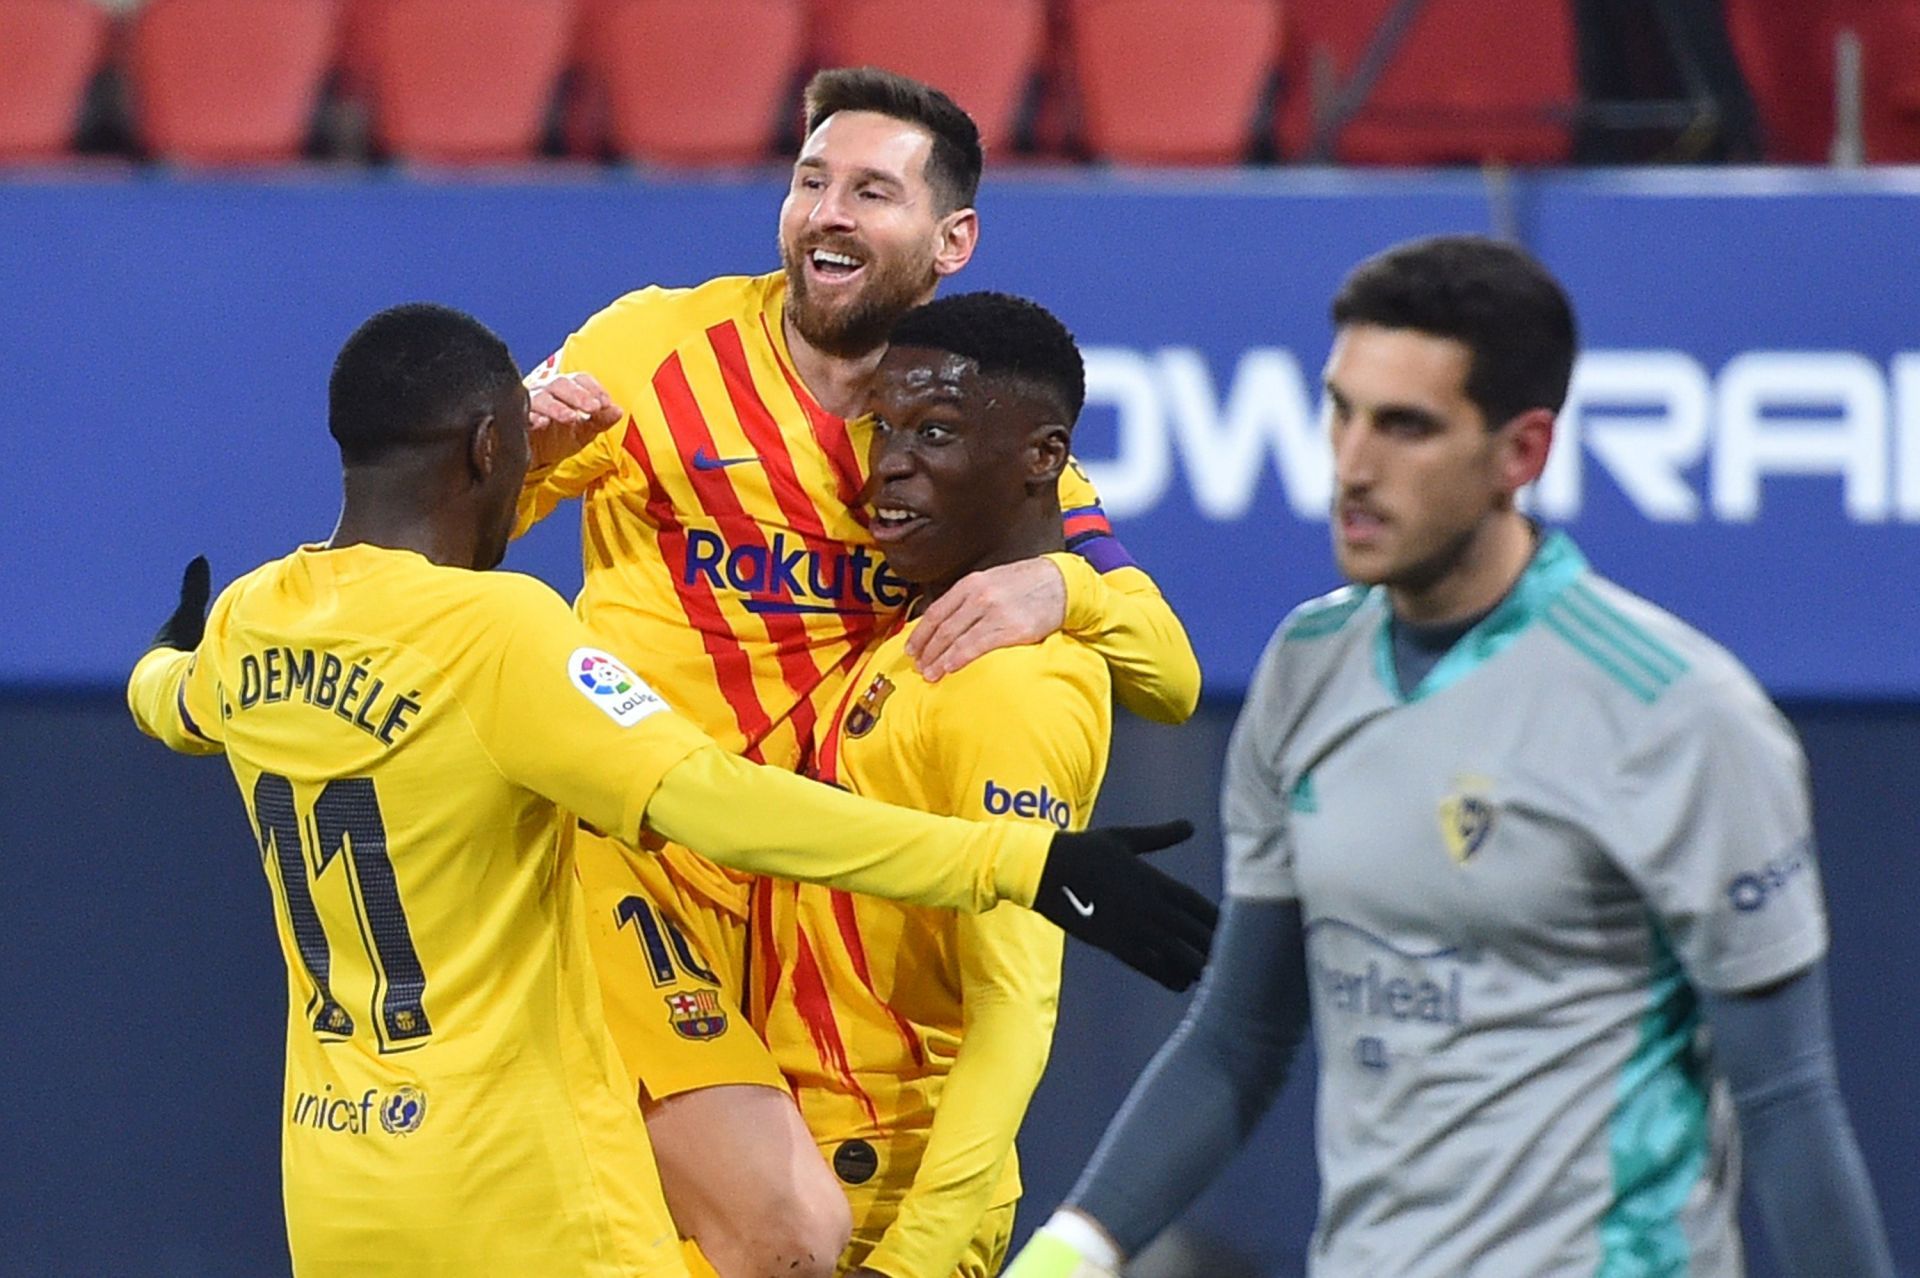 Ilaix Moriba connected brilliantly with Lionel Messi while at Barcelona.